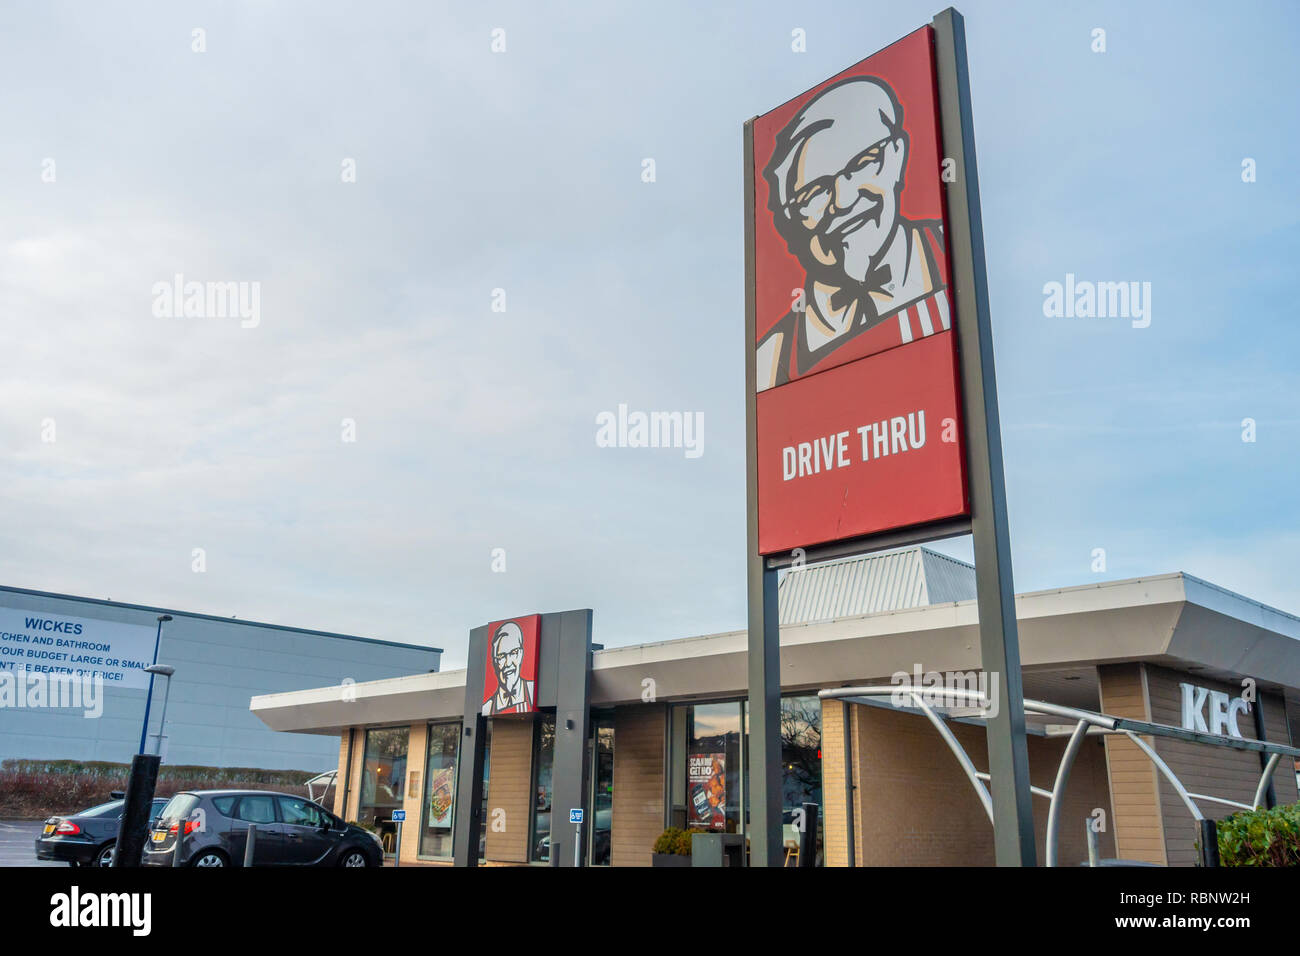 The KFC Kentucky Fried Chicken restaurant on Oxford Road in Reading, UK Stock Photo